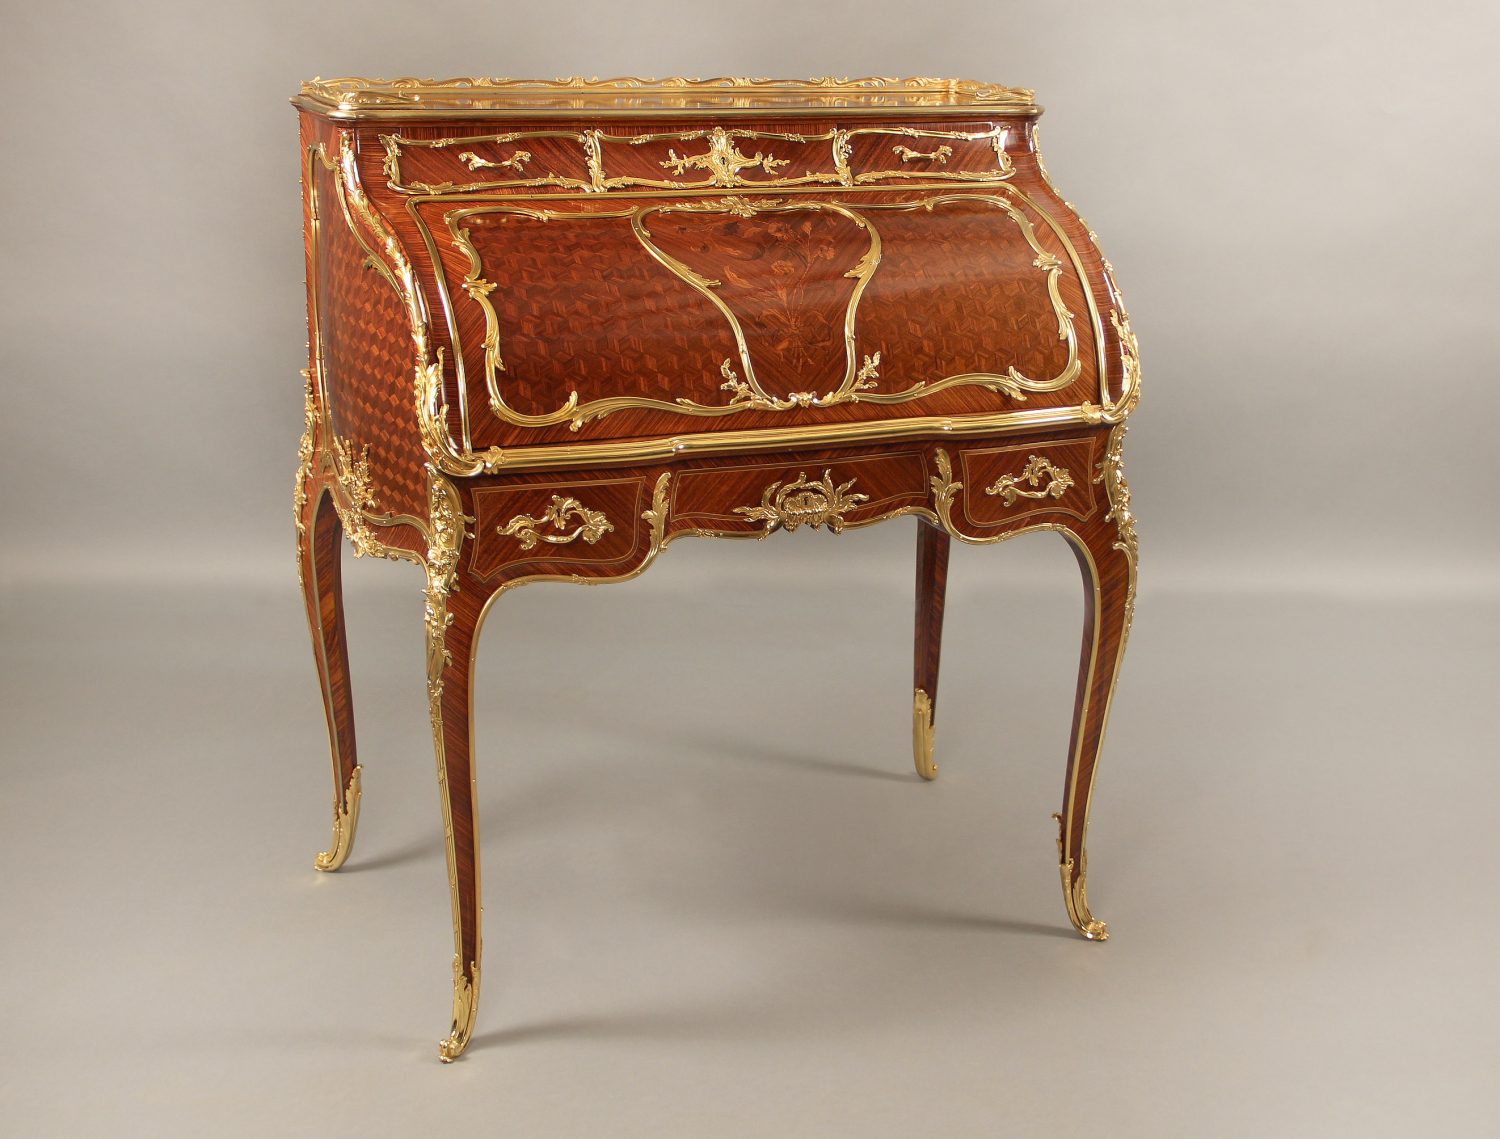 19th Century Louis XV Style Marquetry and Parquetry Bureau a Cylindre